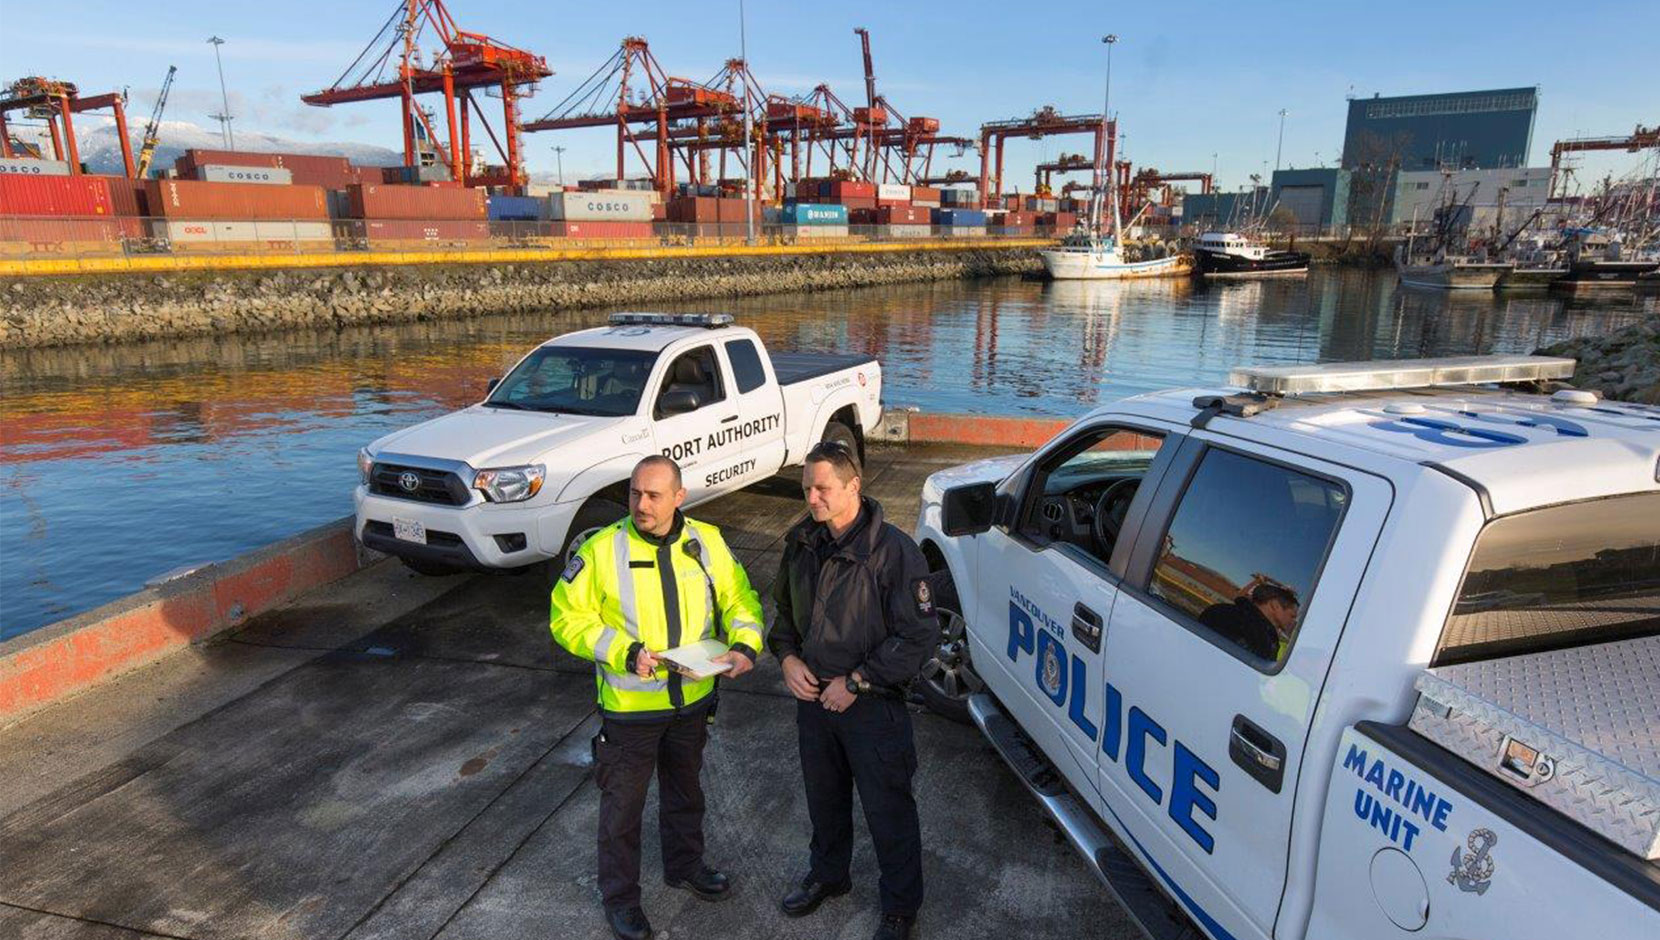 A Port Authority security person and Vancouver Police person both stand outside their trucks by the water outside the Port Authority.